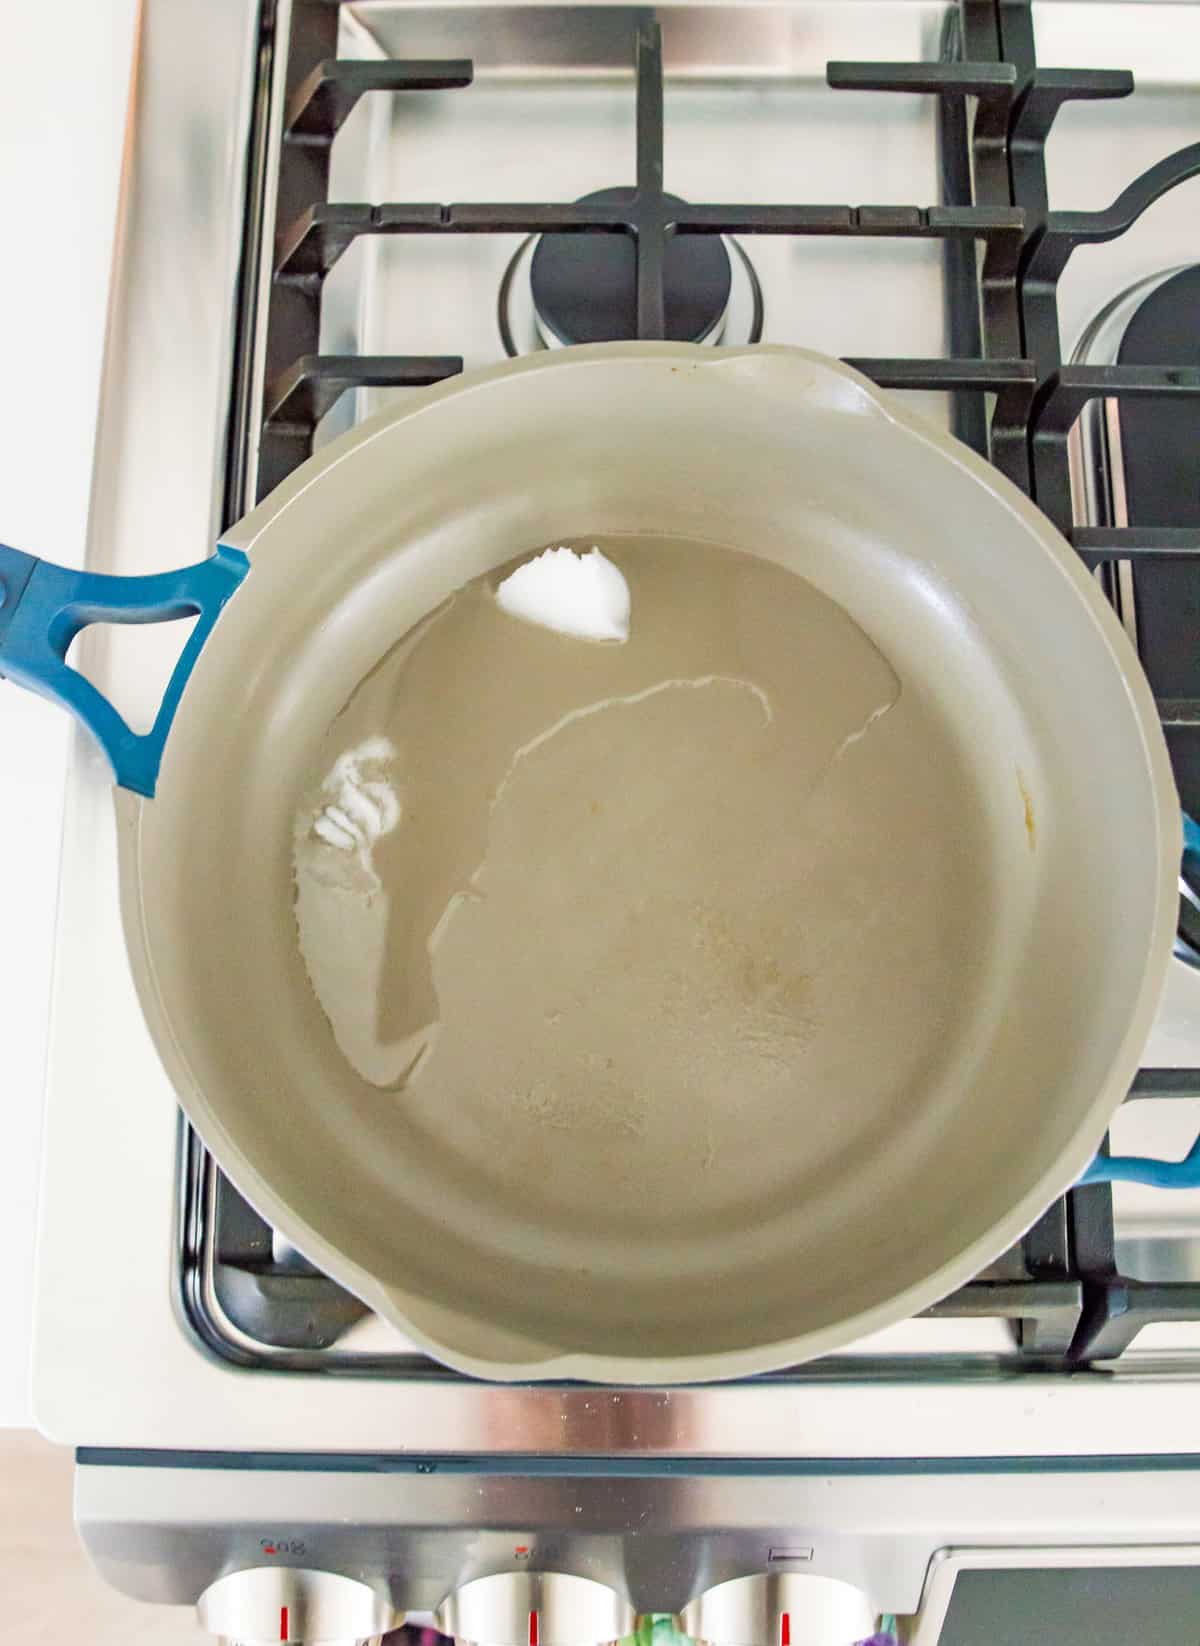 Coconut oil in a pan on the stovetop.